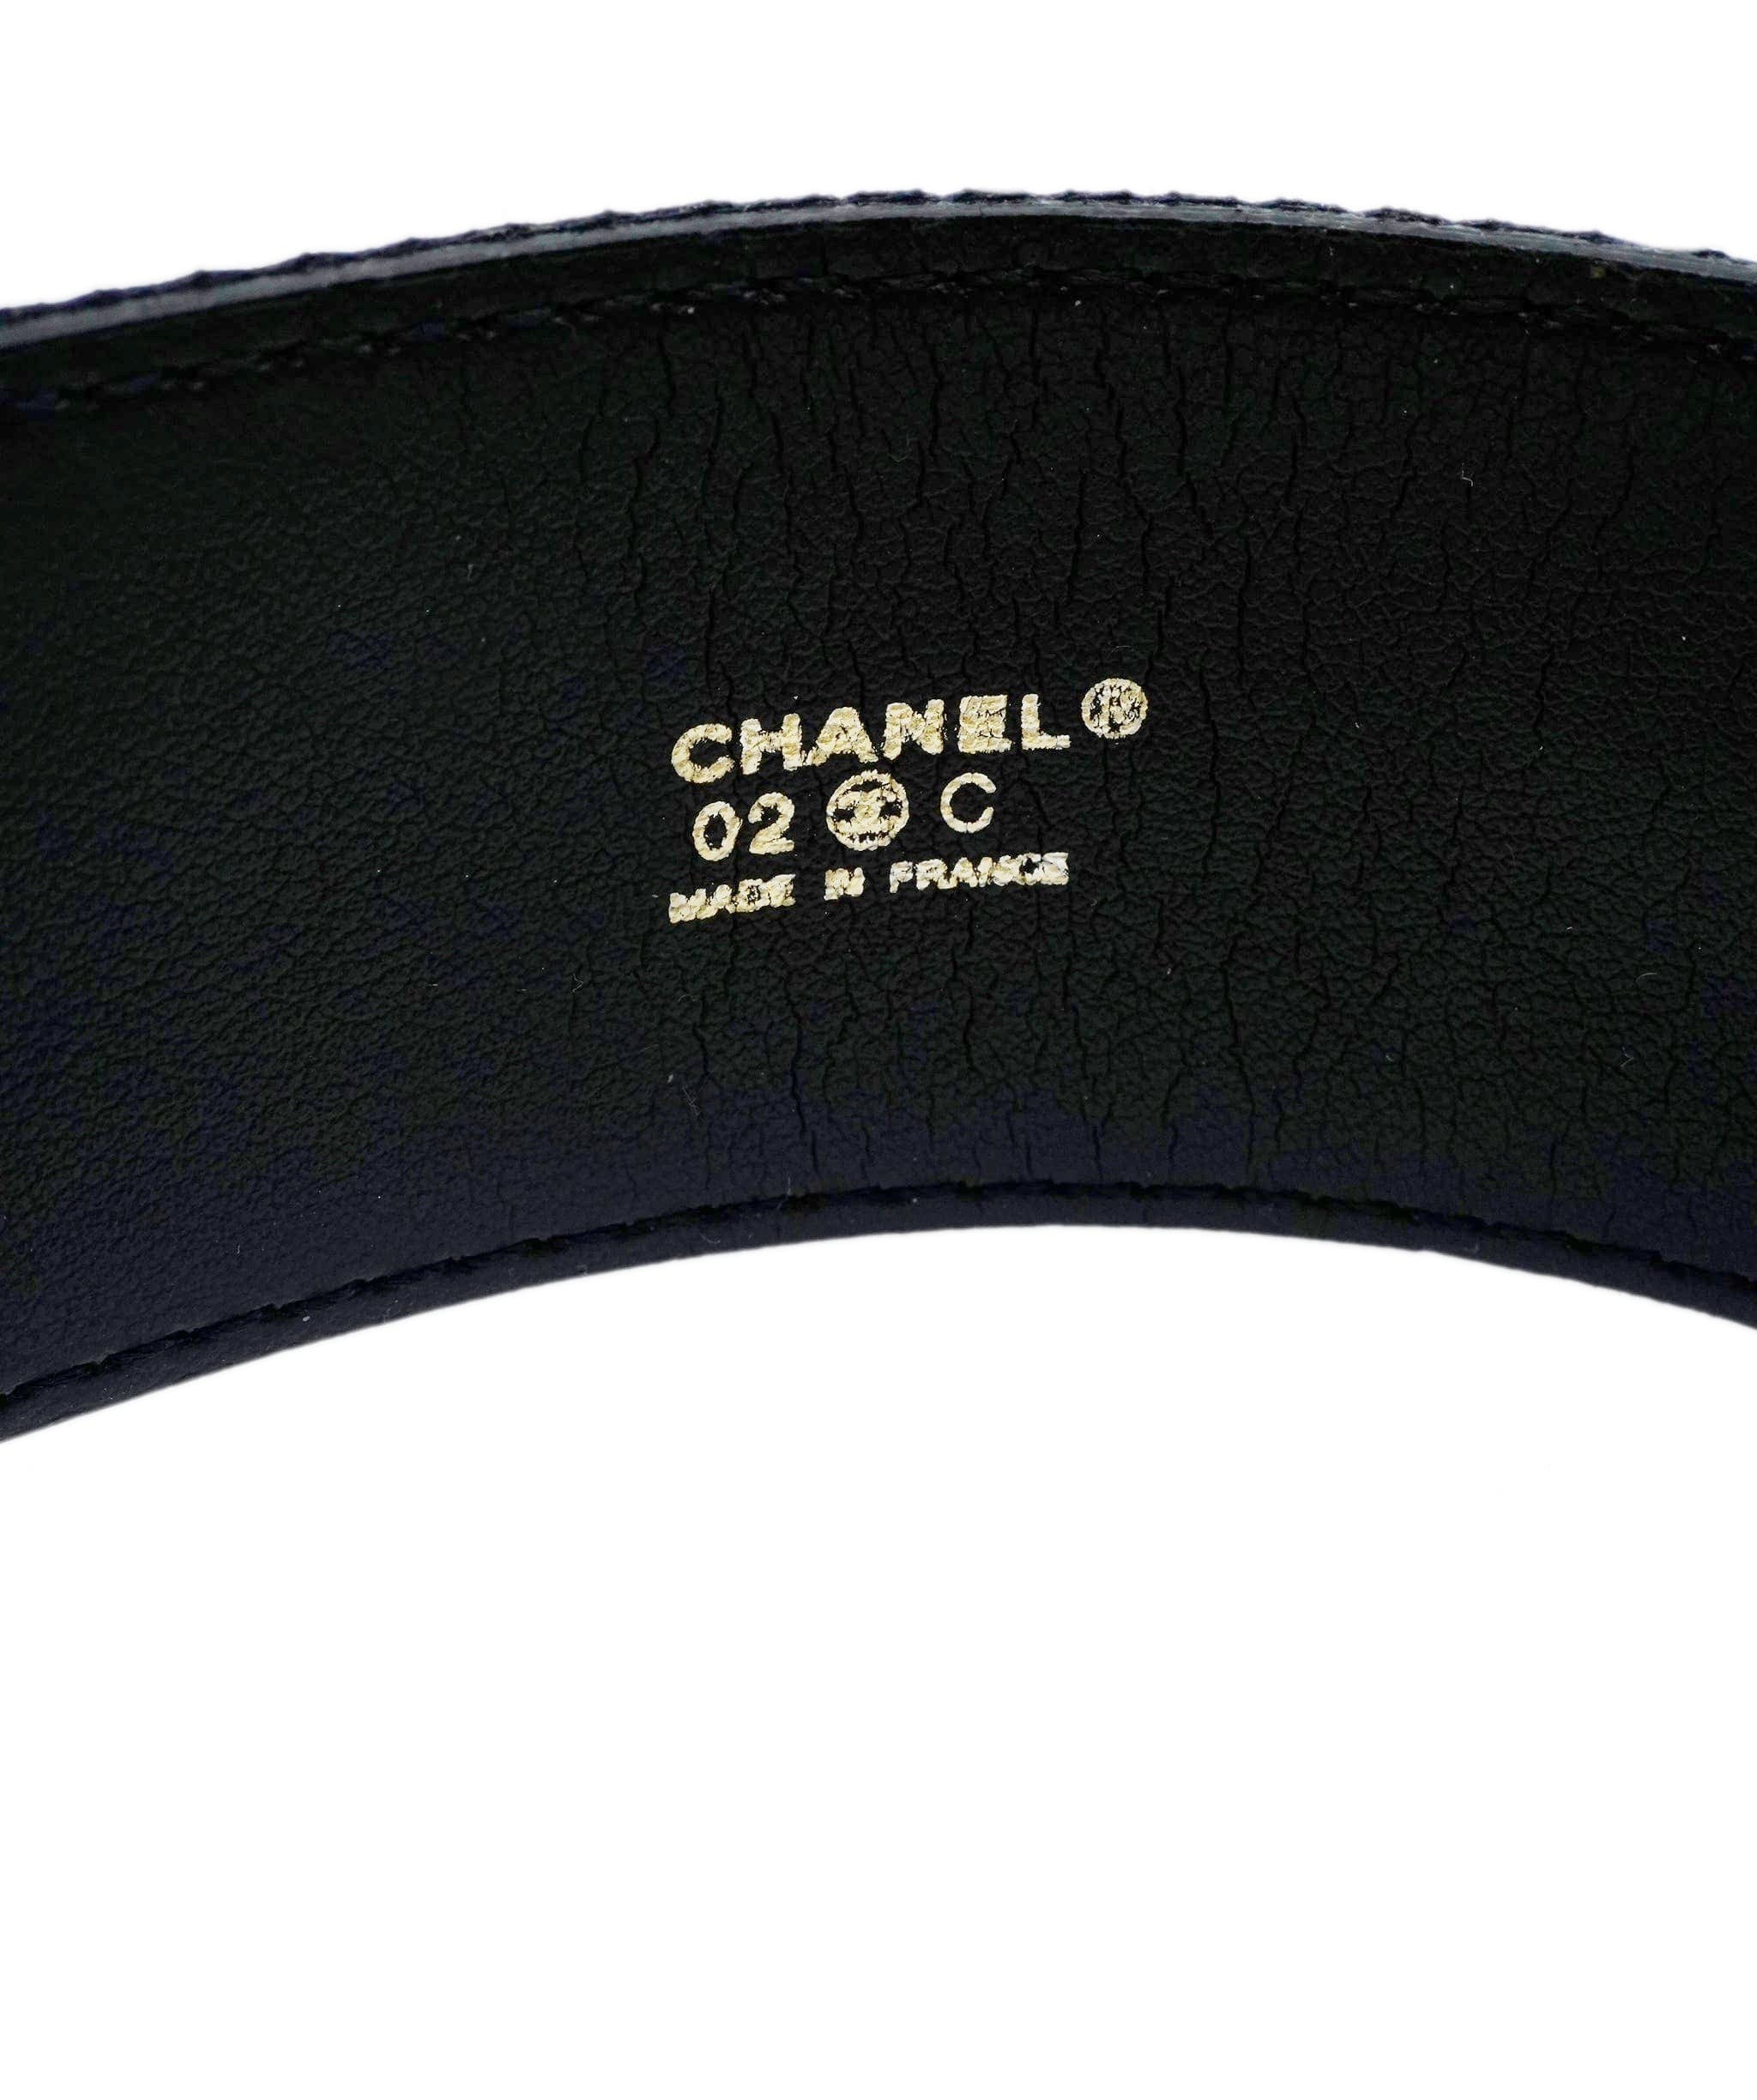 Chanel Chanel Belt Navy Satin Bow and Pearl Detail Size 80 AGC1472